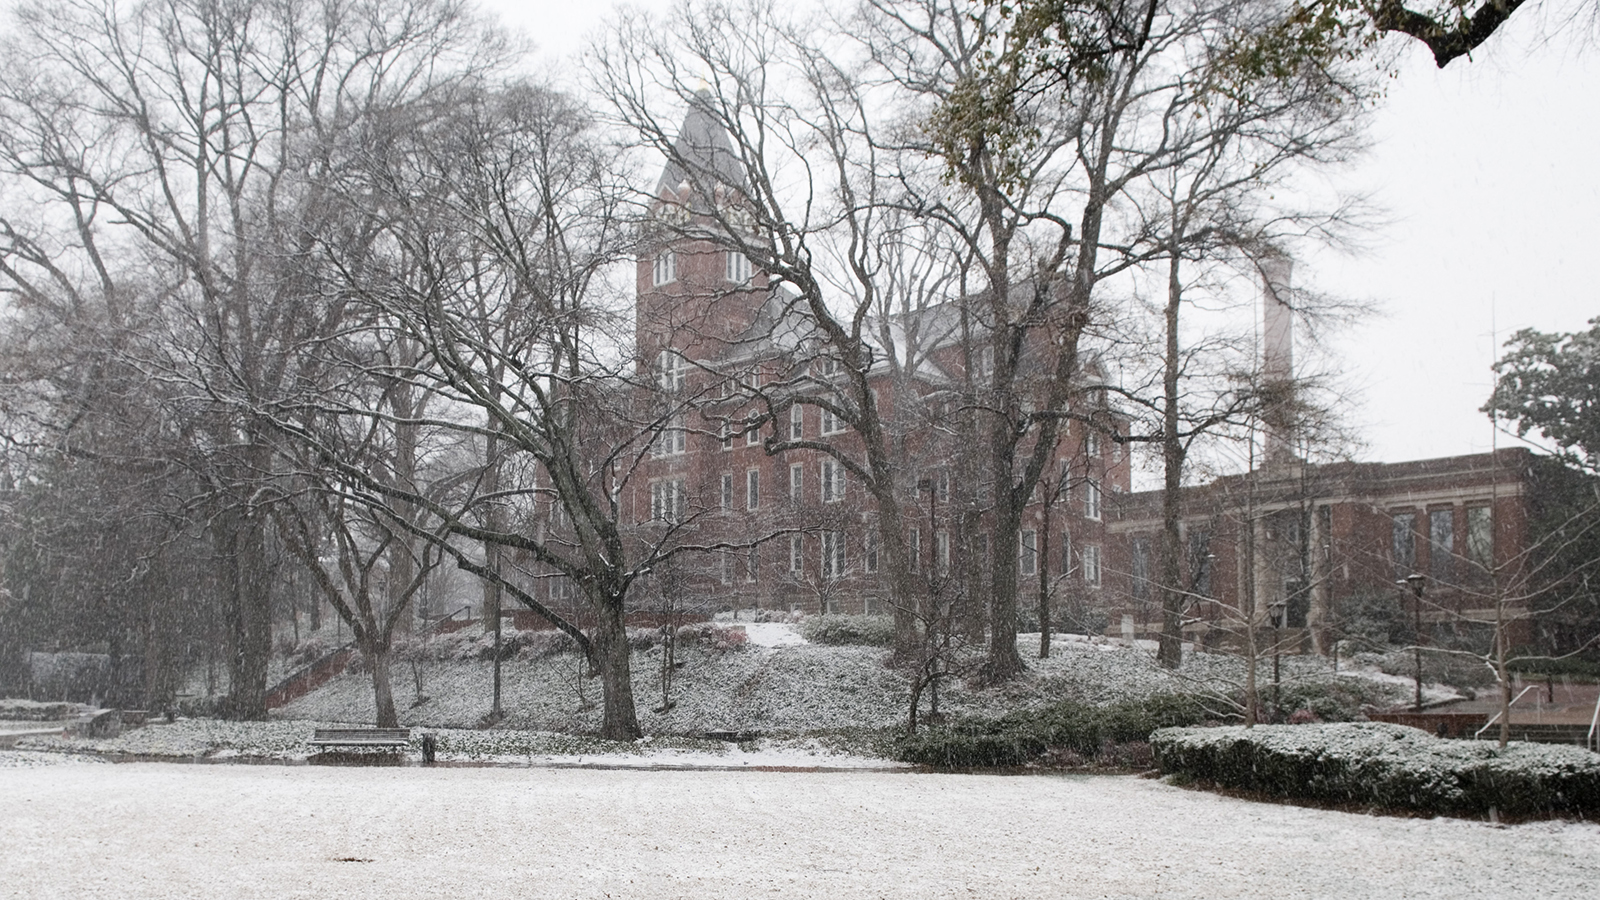 Tech Tower Lawn Covered in Snow